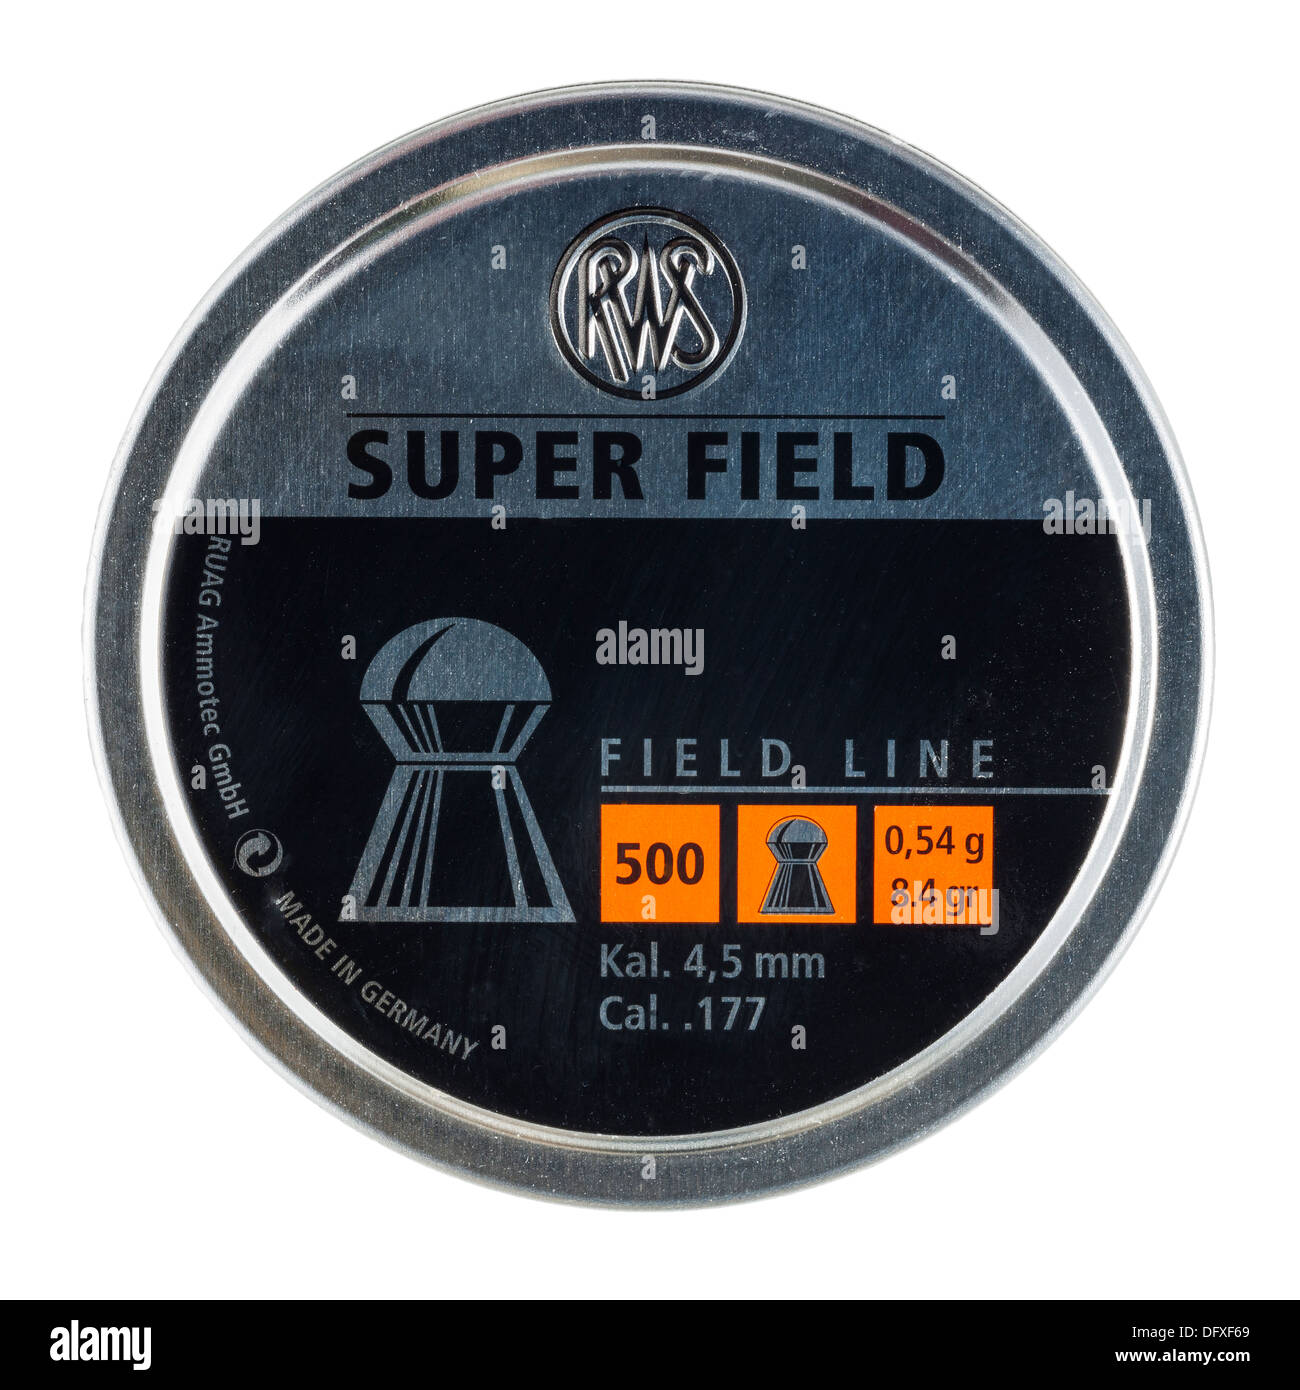 A tin of RWS Super Field .177 calibre airgun pellets on a white background Stock Photo